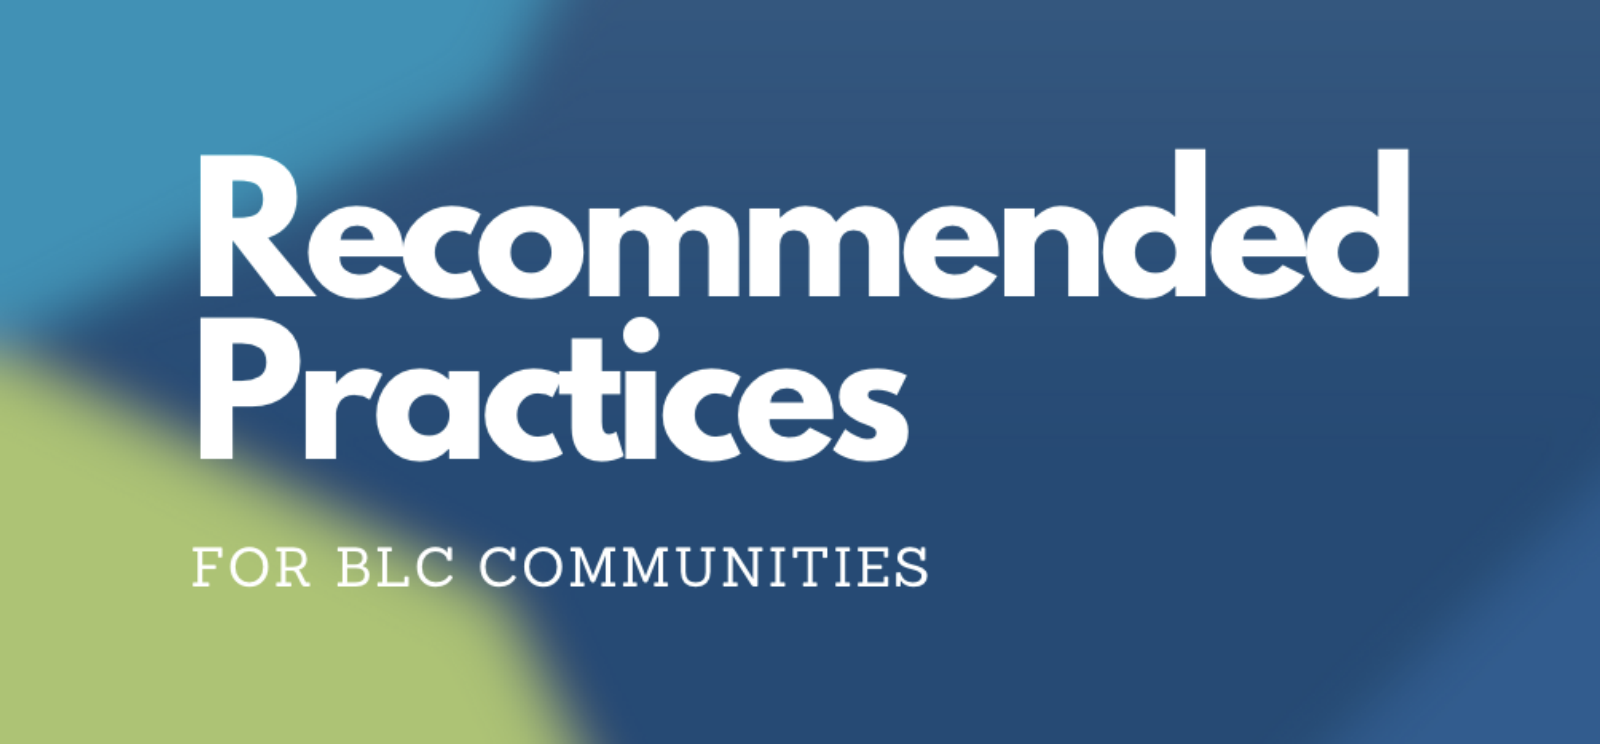 Recommended Practices for BLC Communities